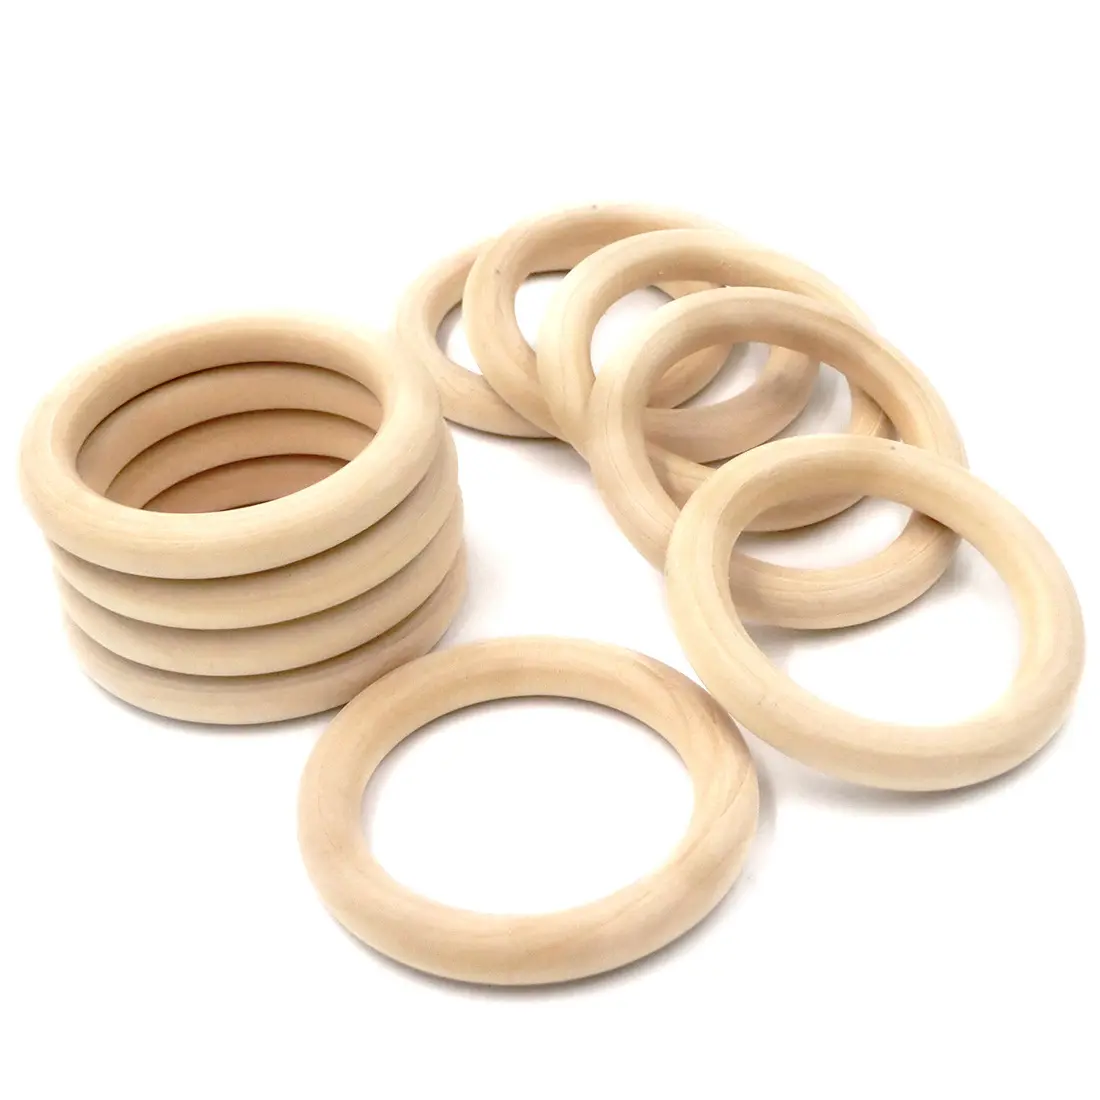 Unfinished Solid Large Macrame Wooden Rings for DIY Craft Pendant Connectors Jewelry Making